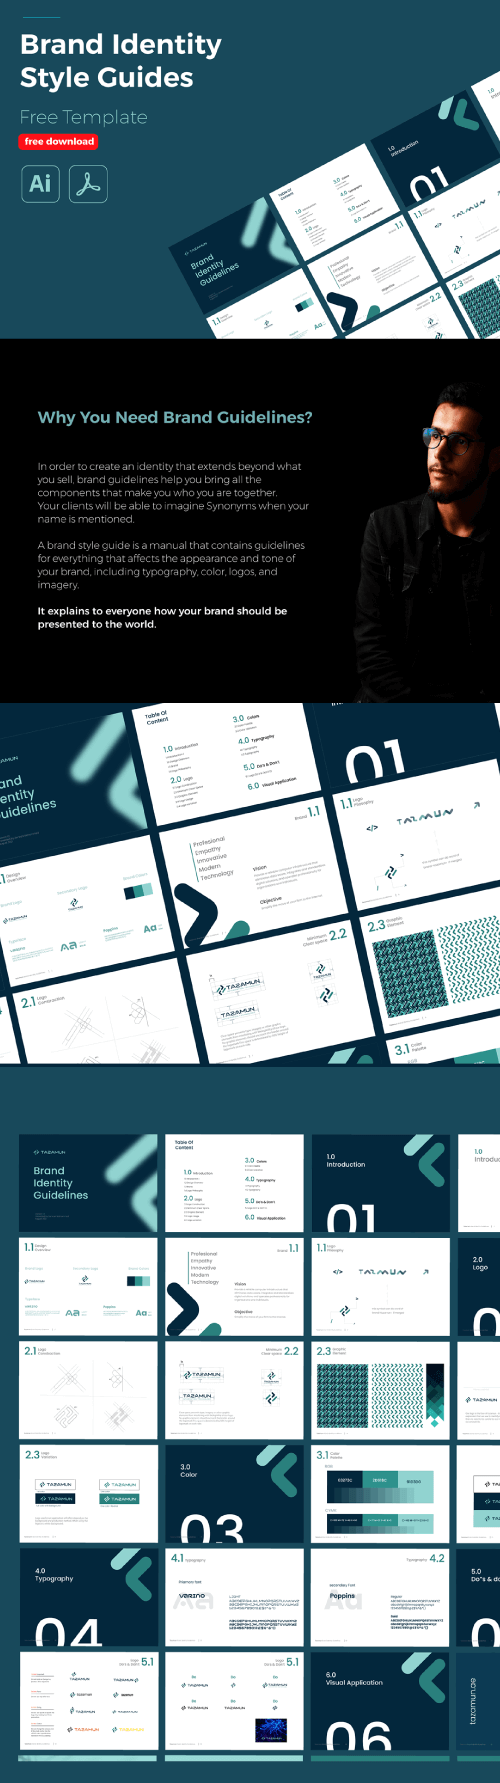 Free Brand identity guidelines template :: Behance